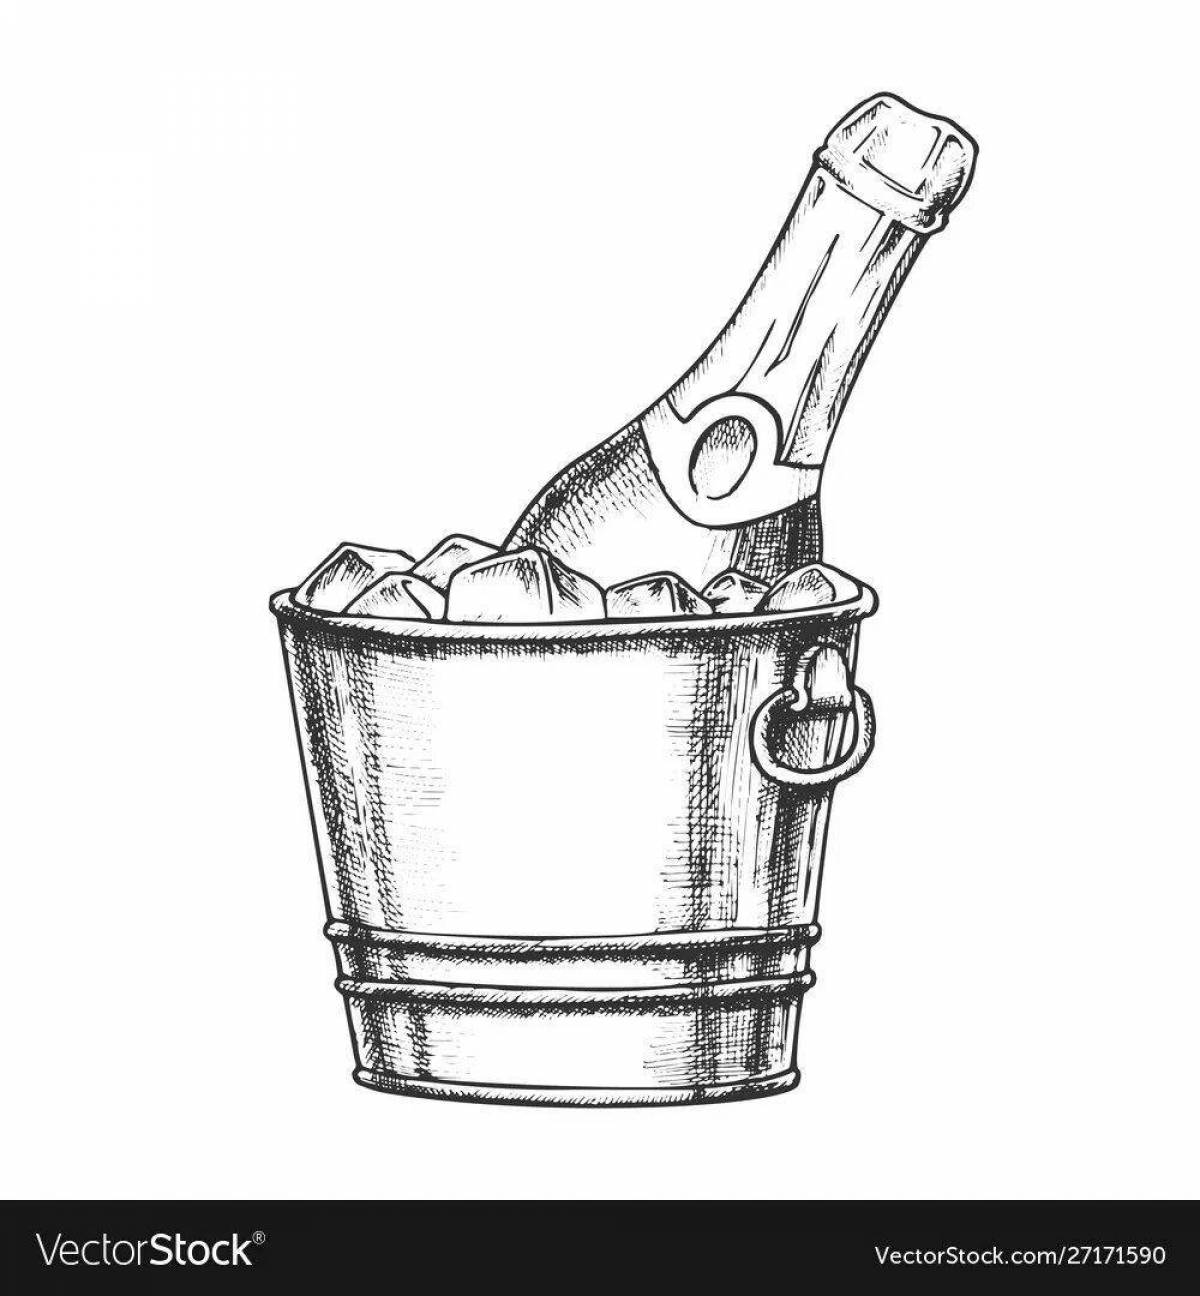 Exquisite champagne bottle coloring book